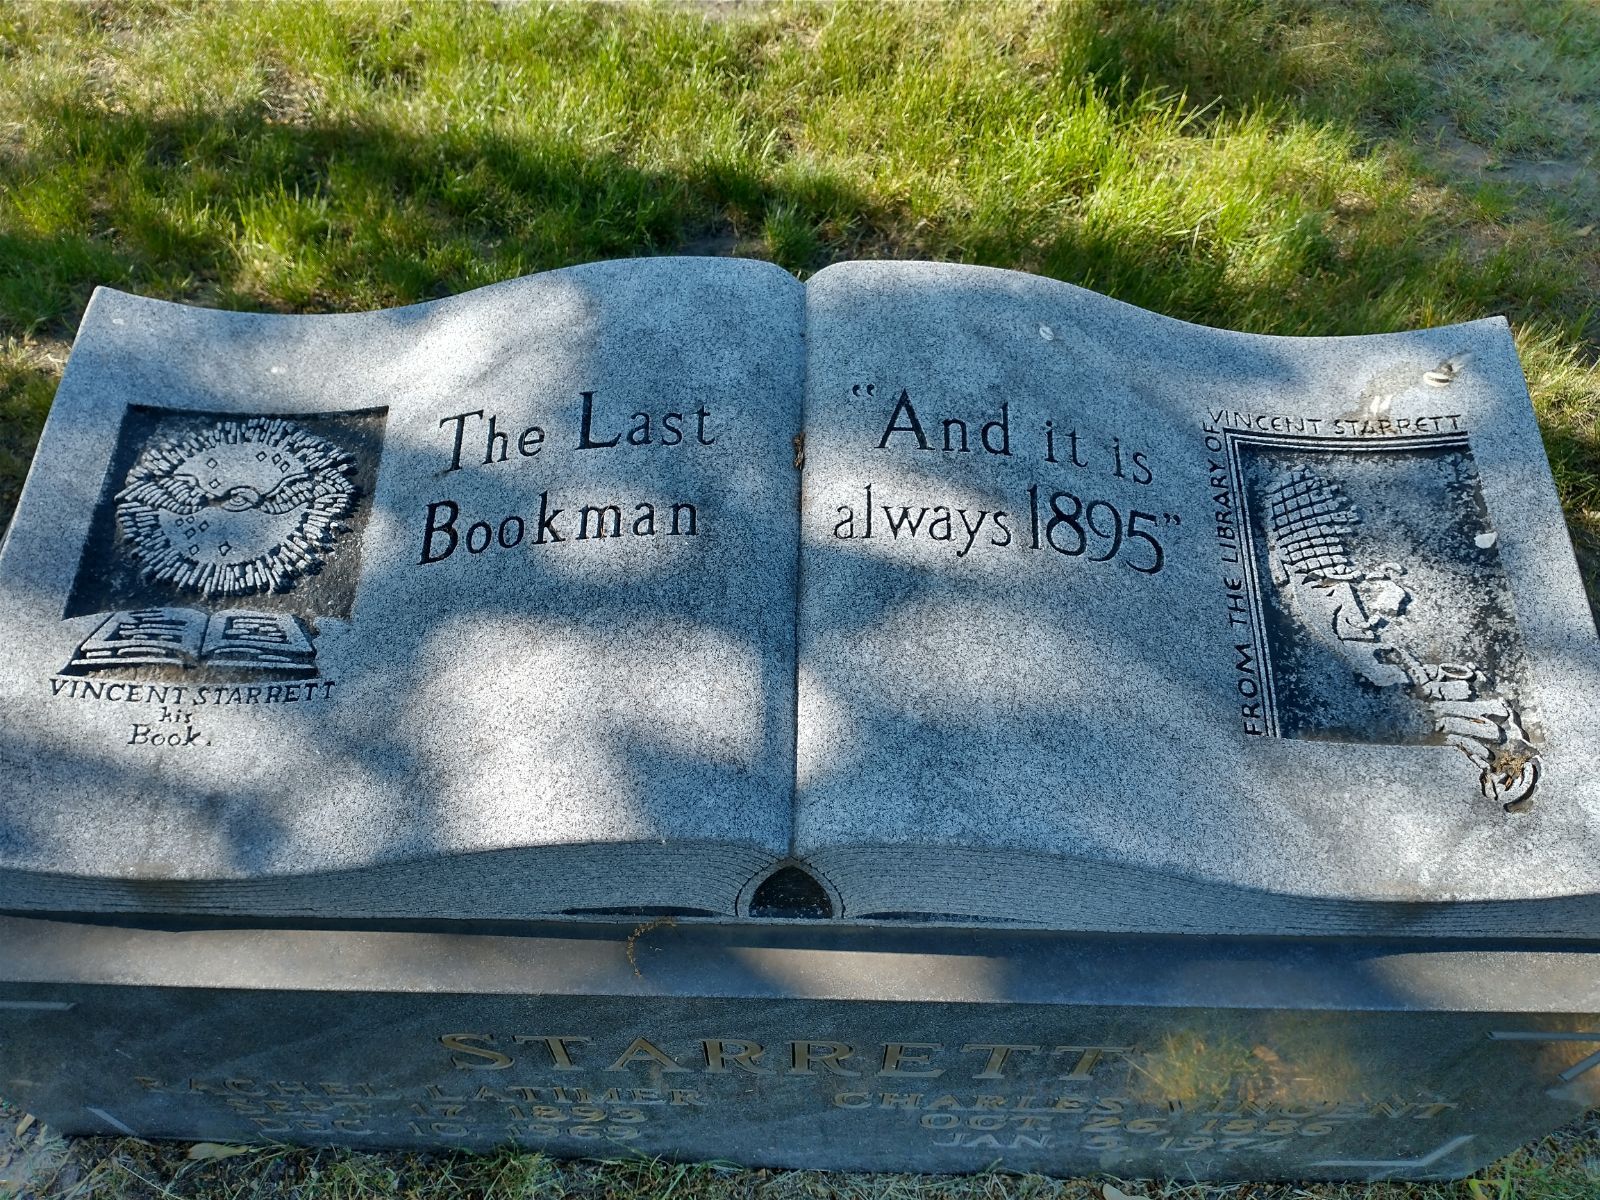 Book
          carved in stone on a headstone with The Last Bookmark and And it is always 1985 on it.